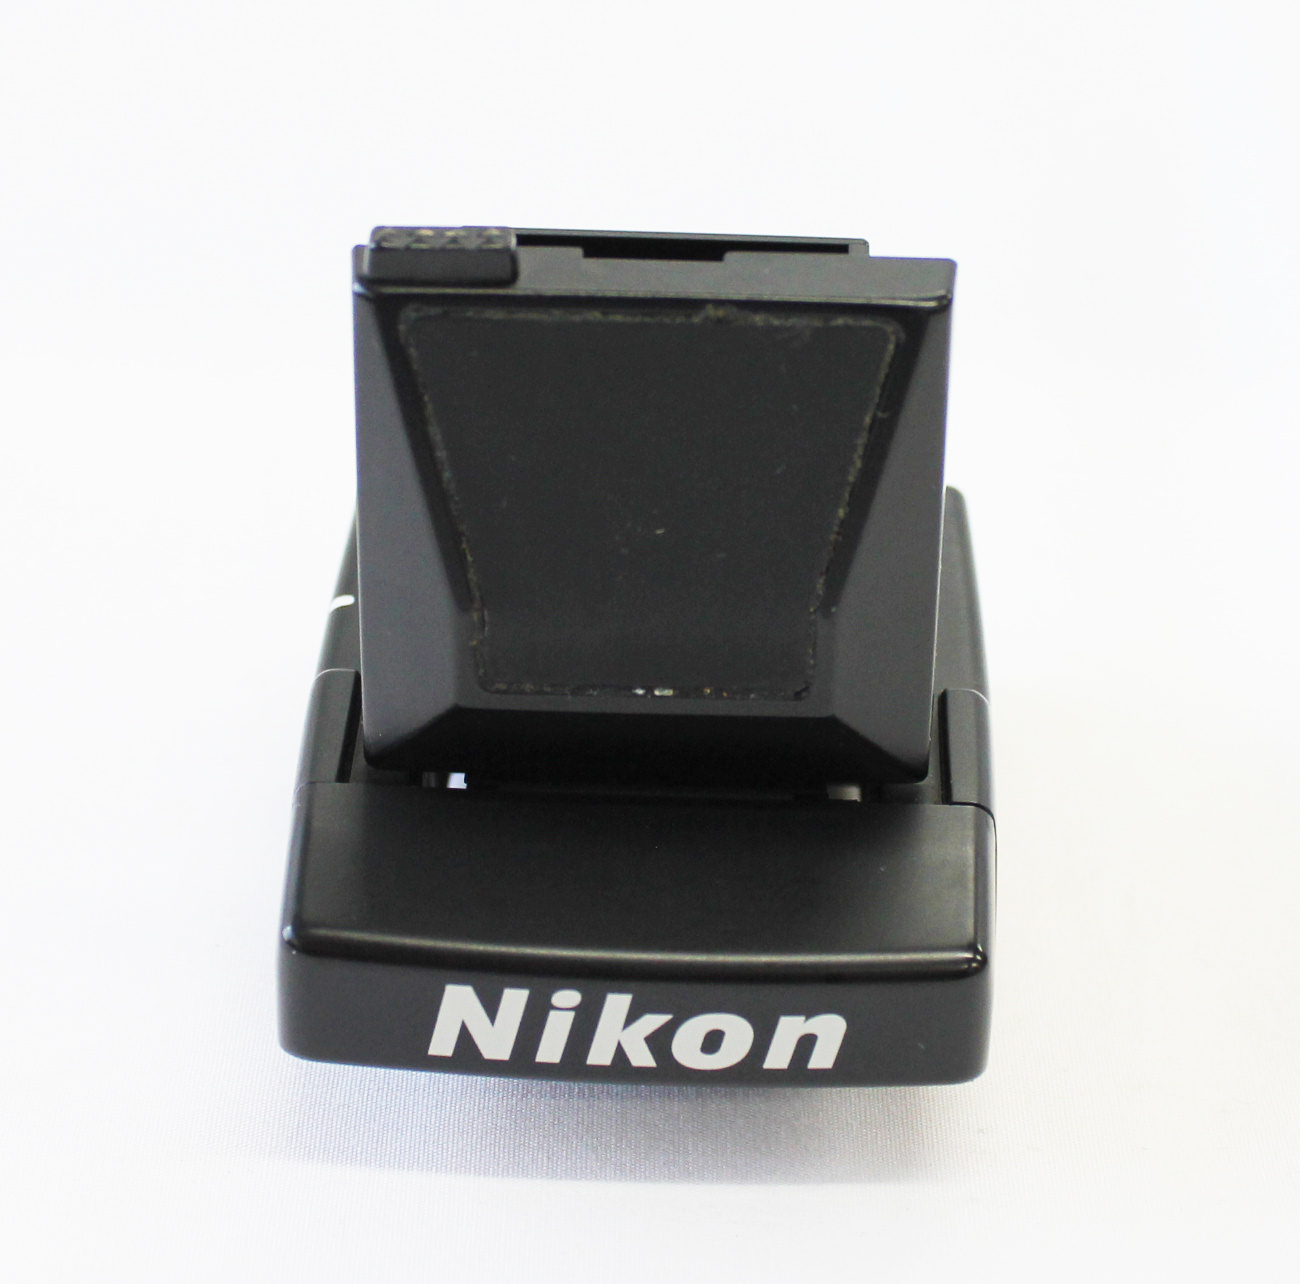  Nikon DW-20 Waist Level Finder for F4 F4S F4E from Japan Photo 1